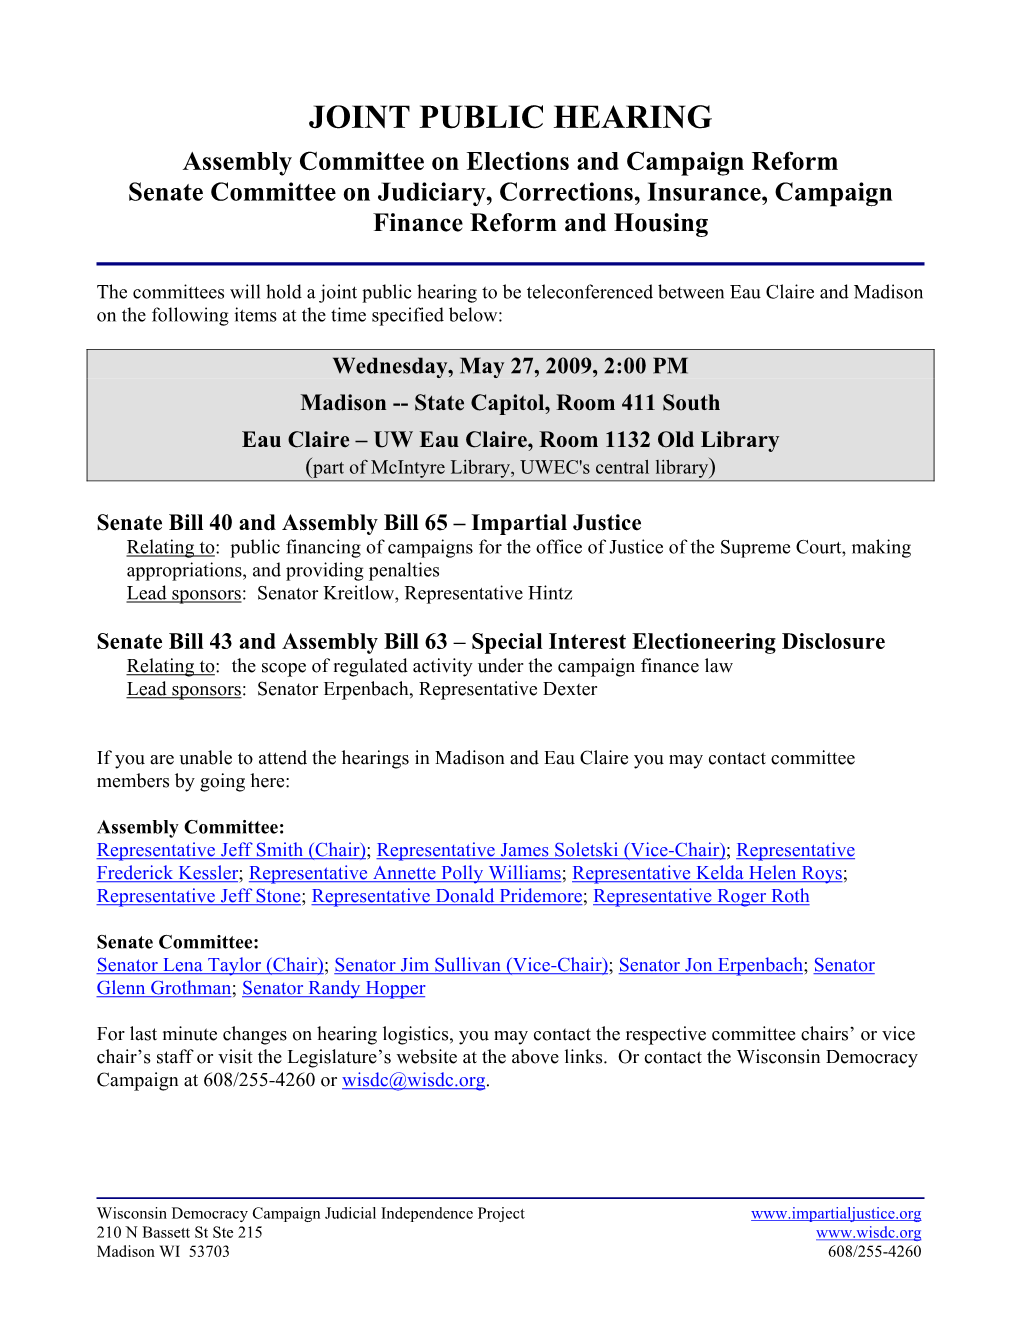 JOINT PUBLIC HEARING Assembly Committee on Elections and Campaign Reform Senate Committee on Judiciary, Corrections, Insurance, Campaign Finance Reform and Housing